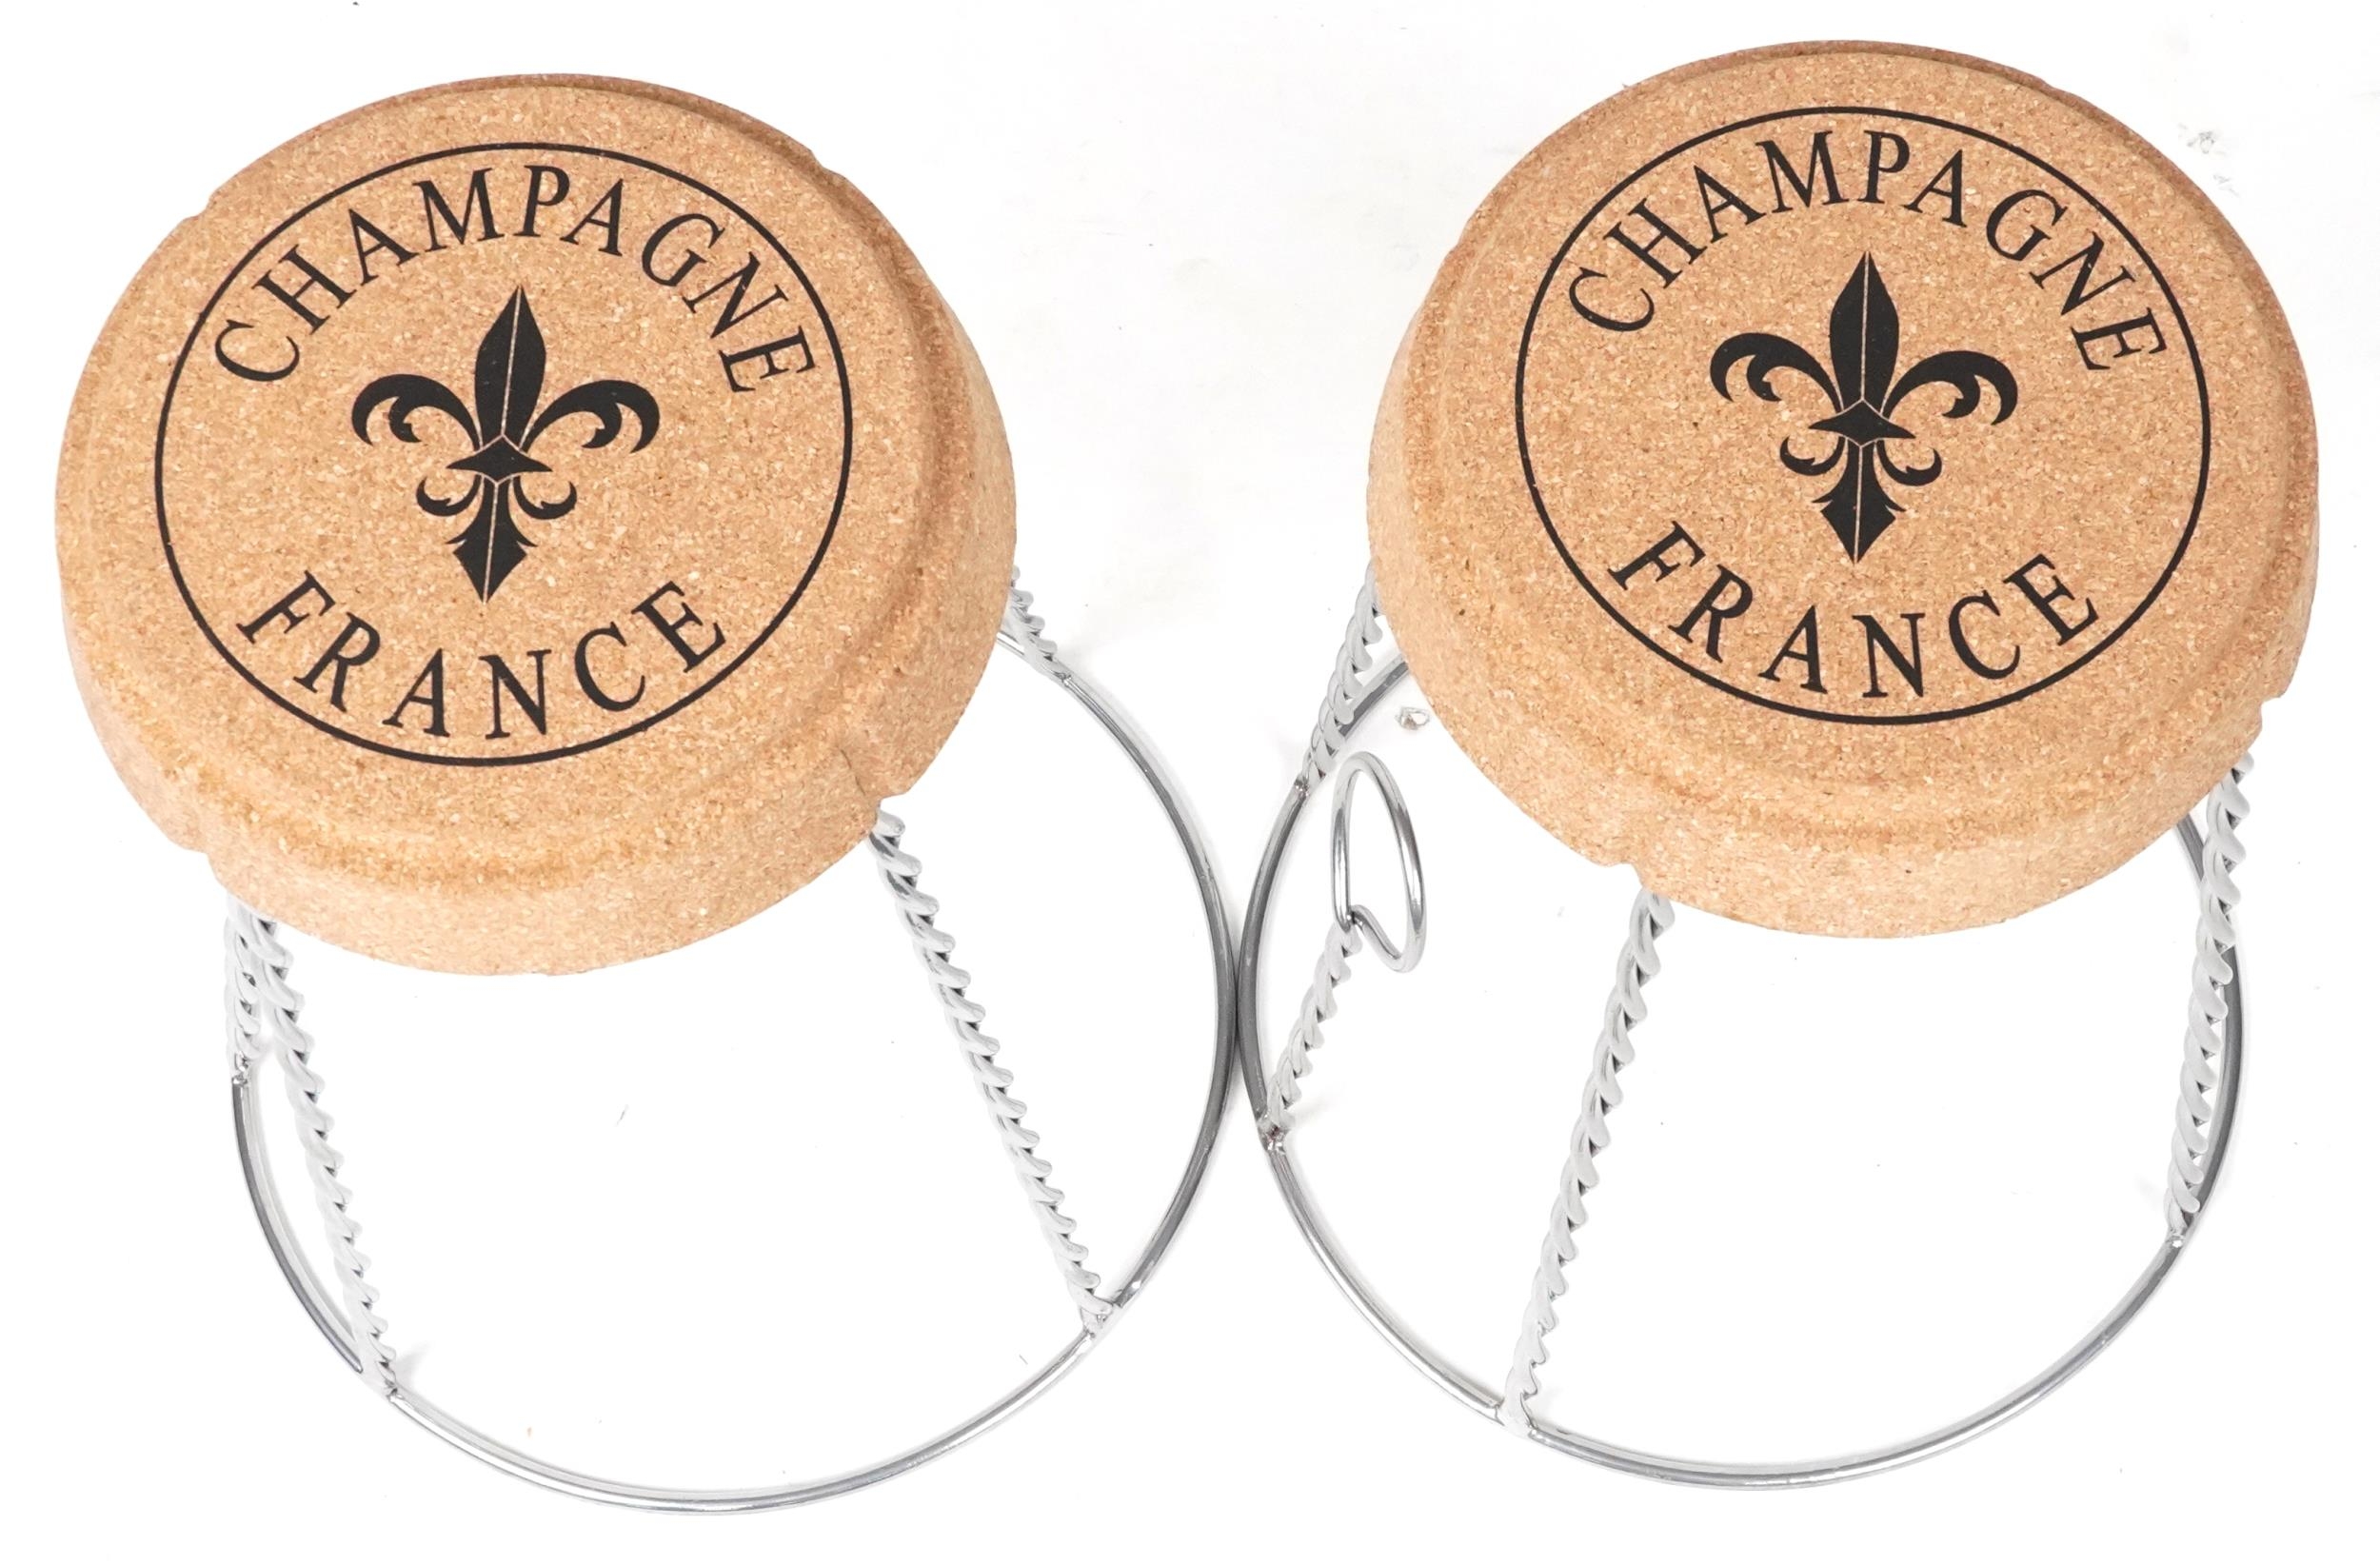 Pair of Champagne cork design stools, each 52cm high - Image 2 of 3